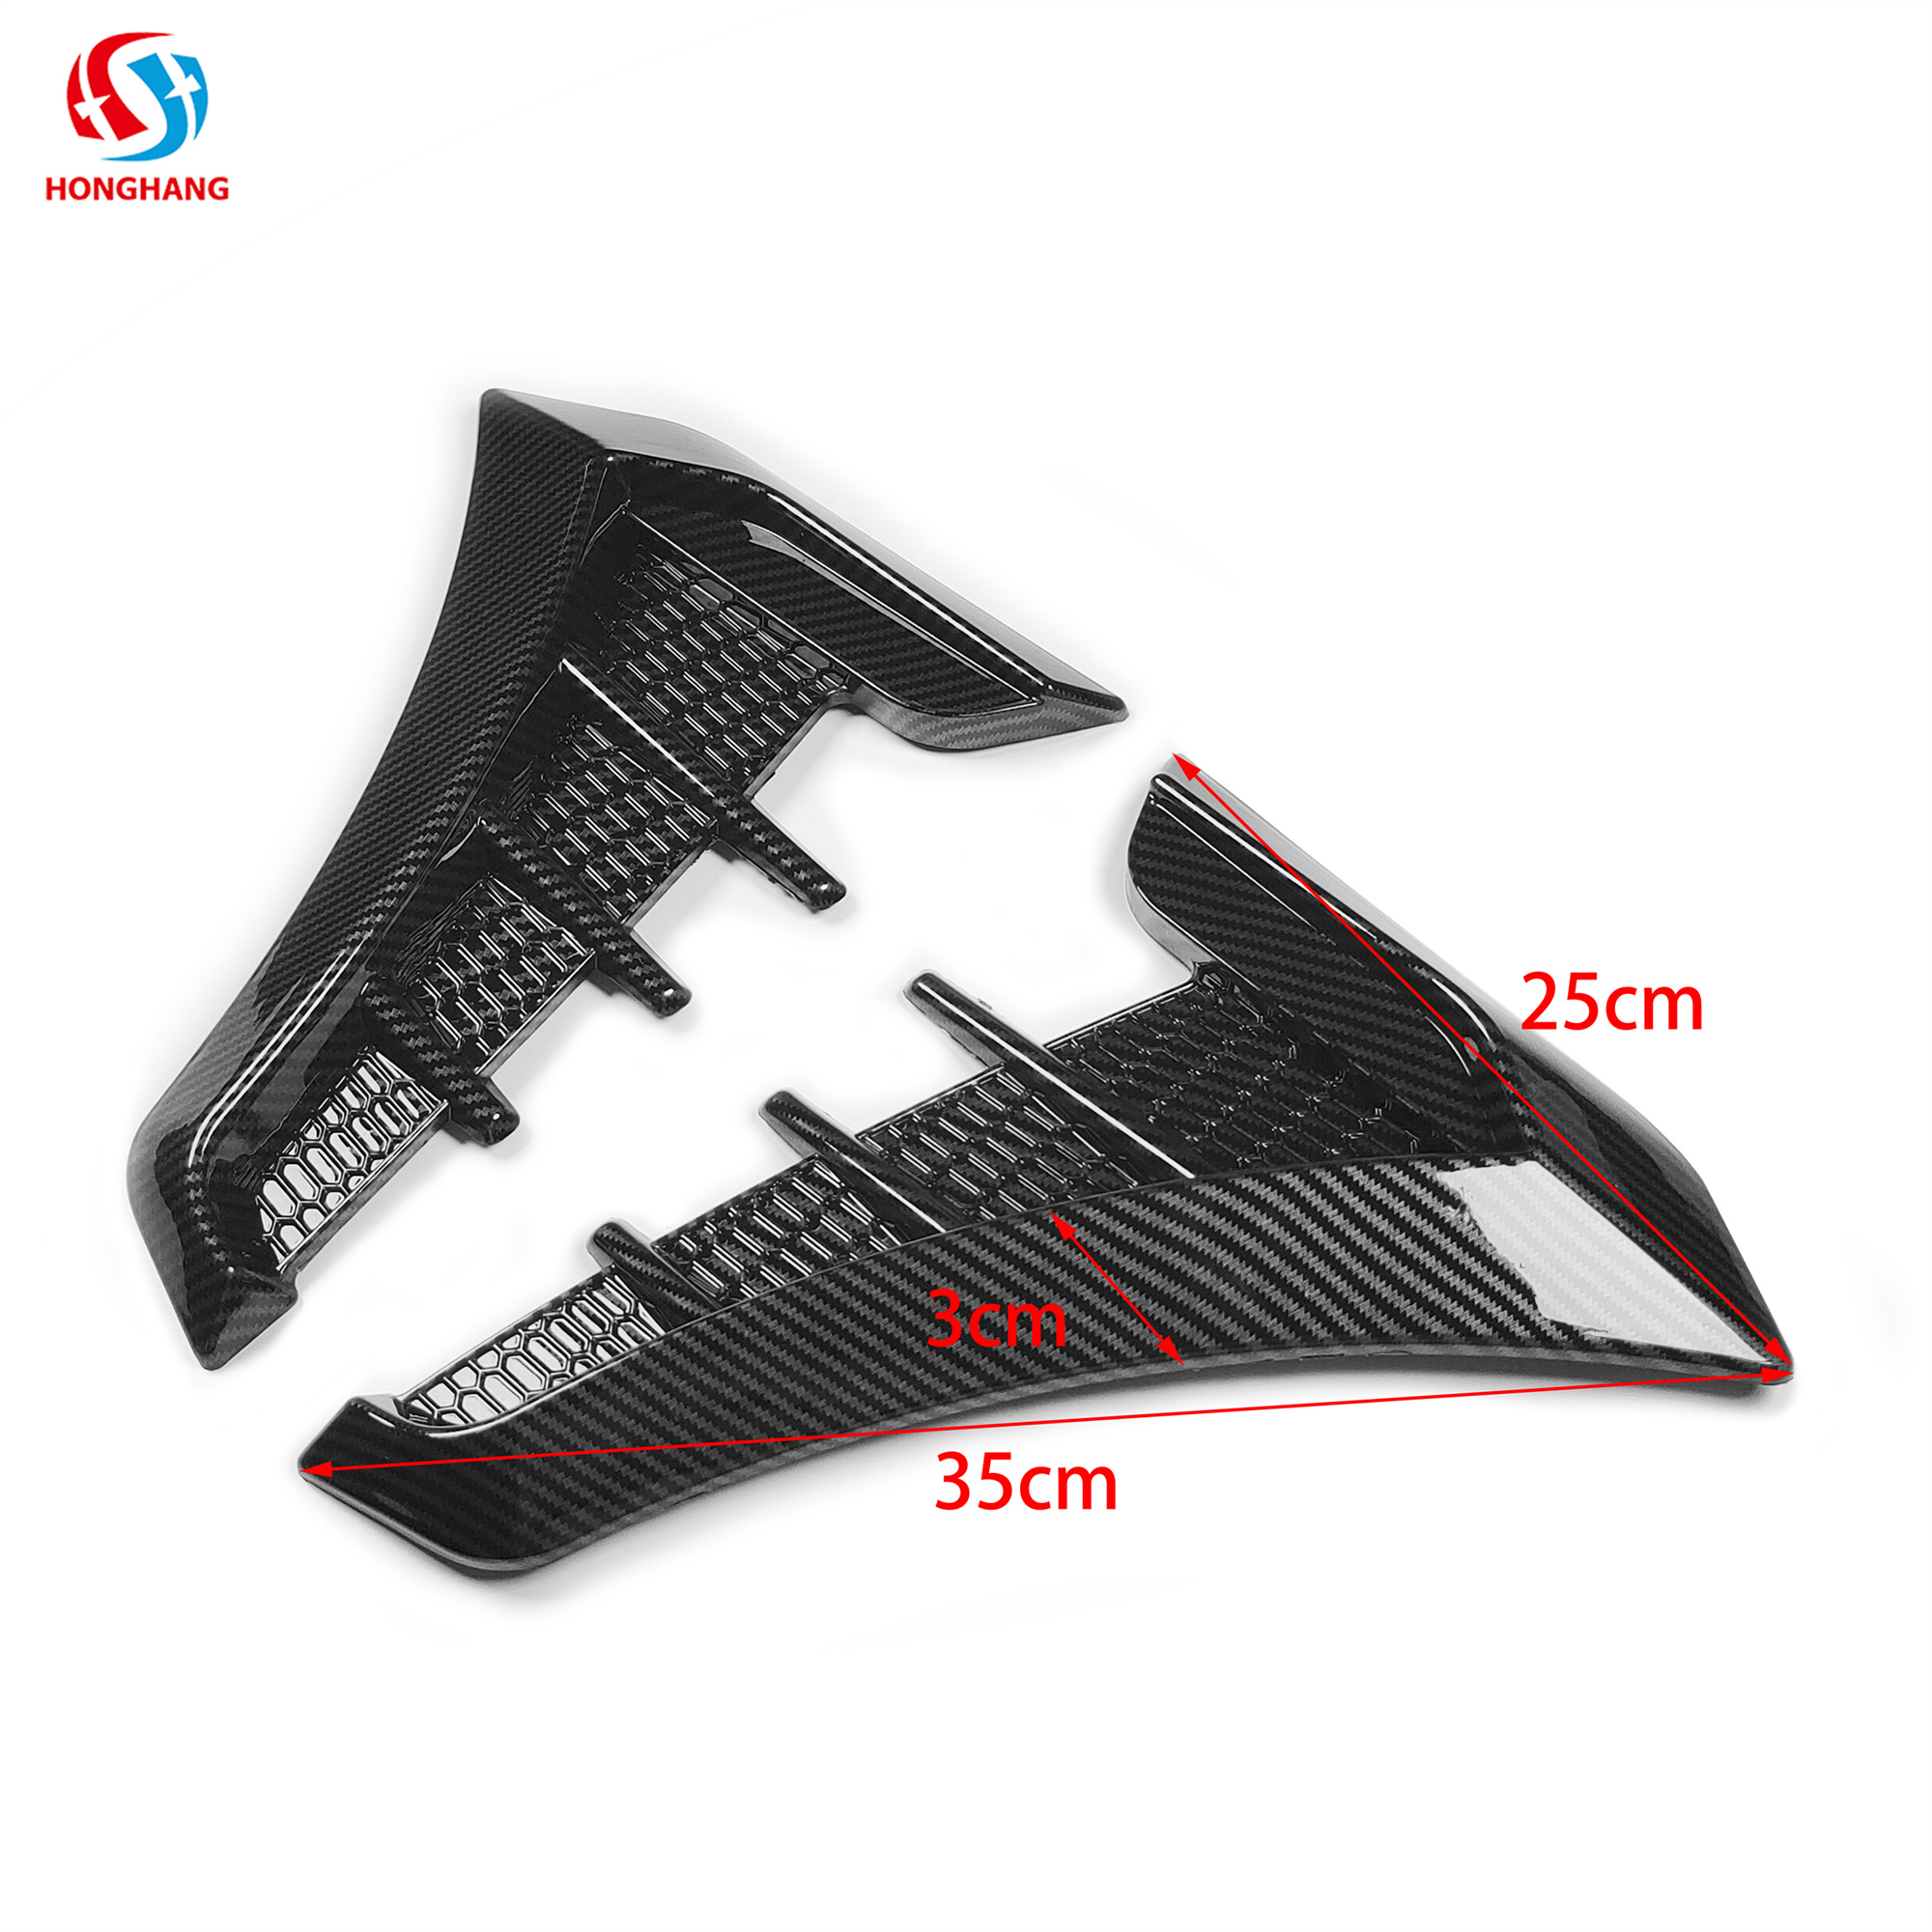 Type D Universal Side Spoiler Sticker Trim For All Cars